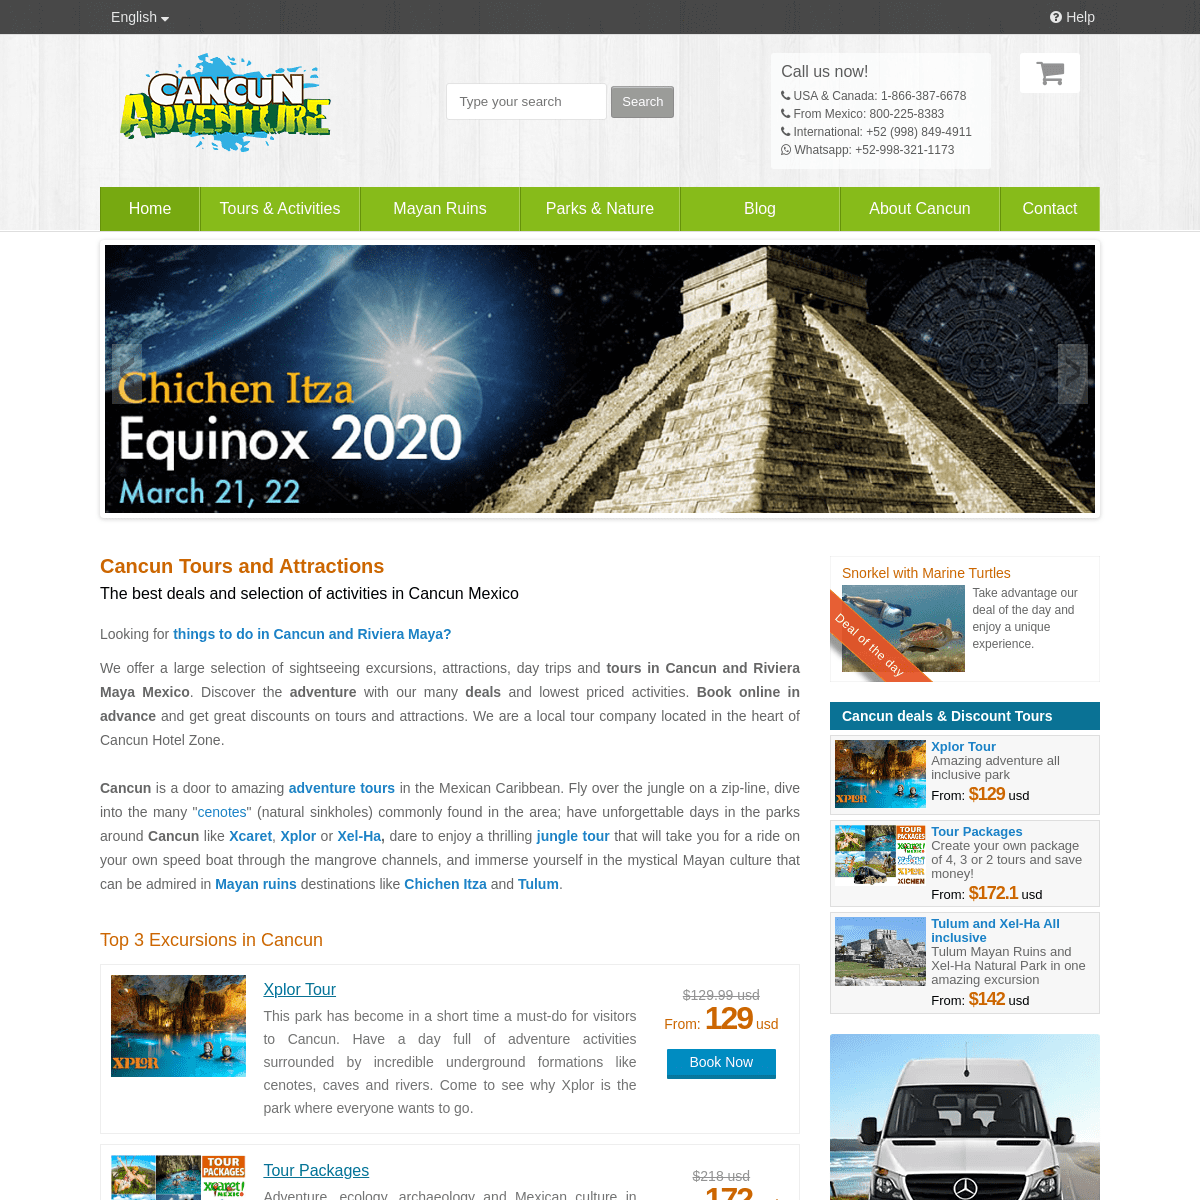 A complete backup of cancunadventure.net